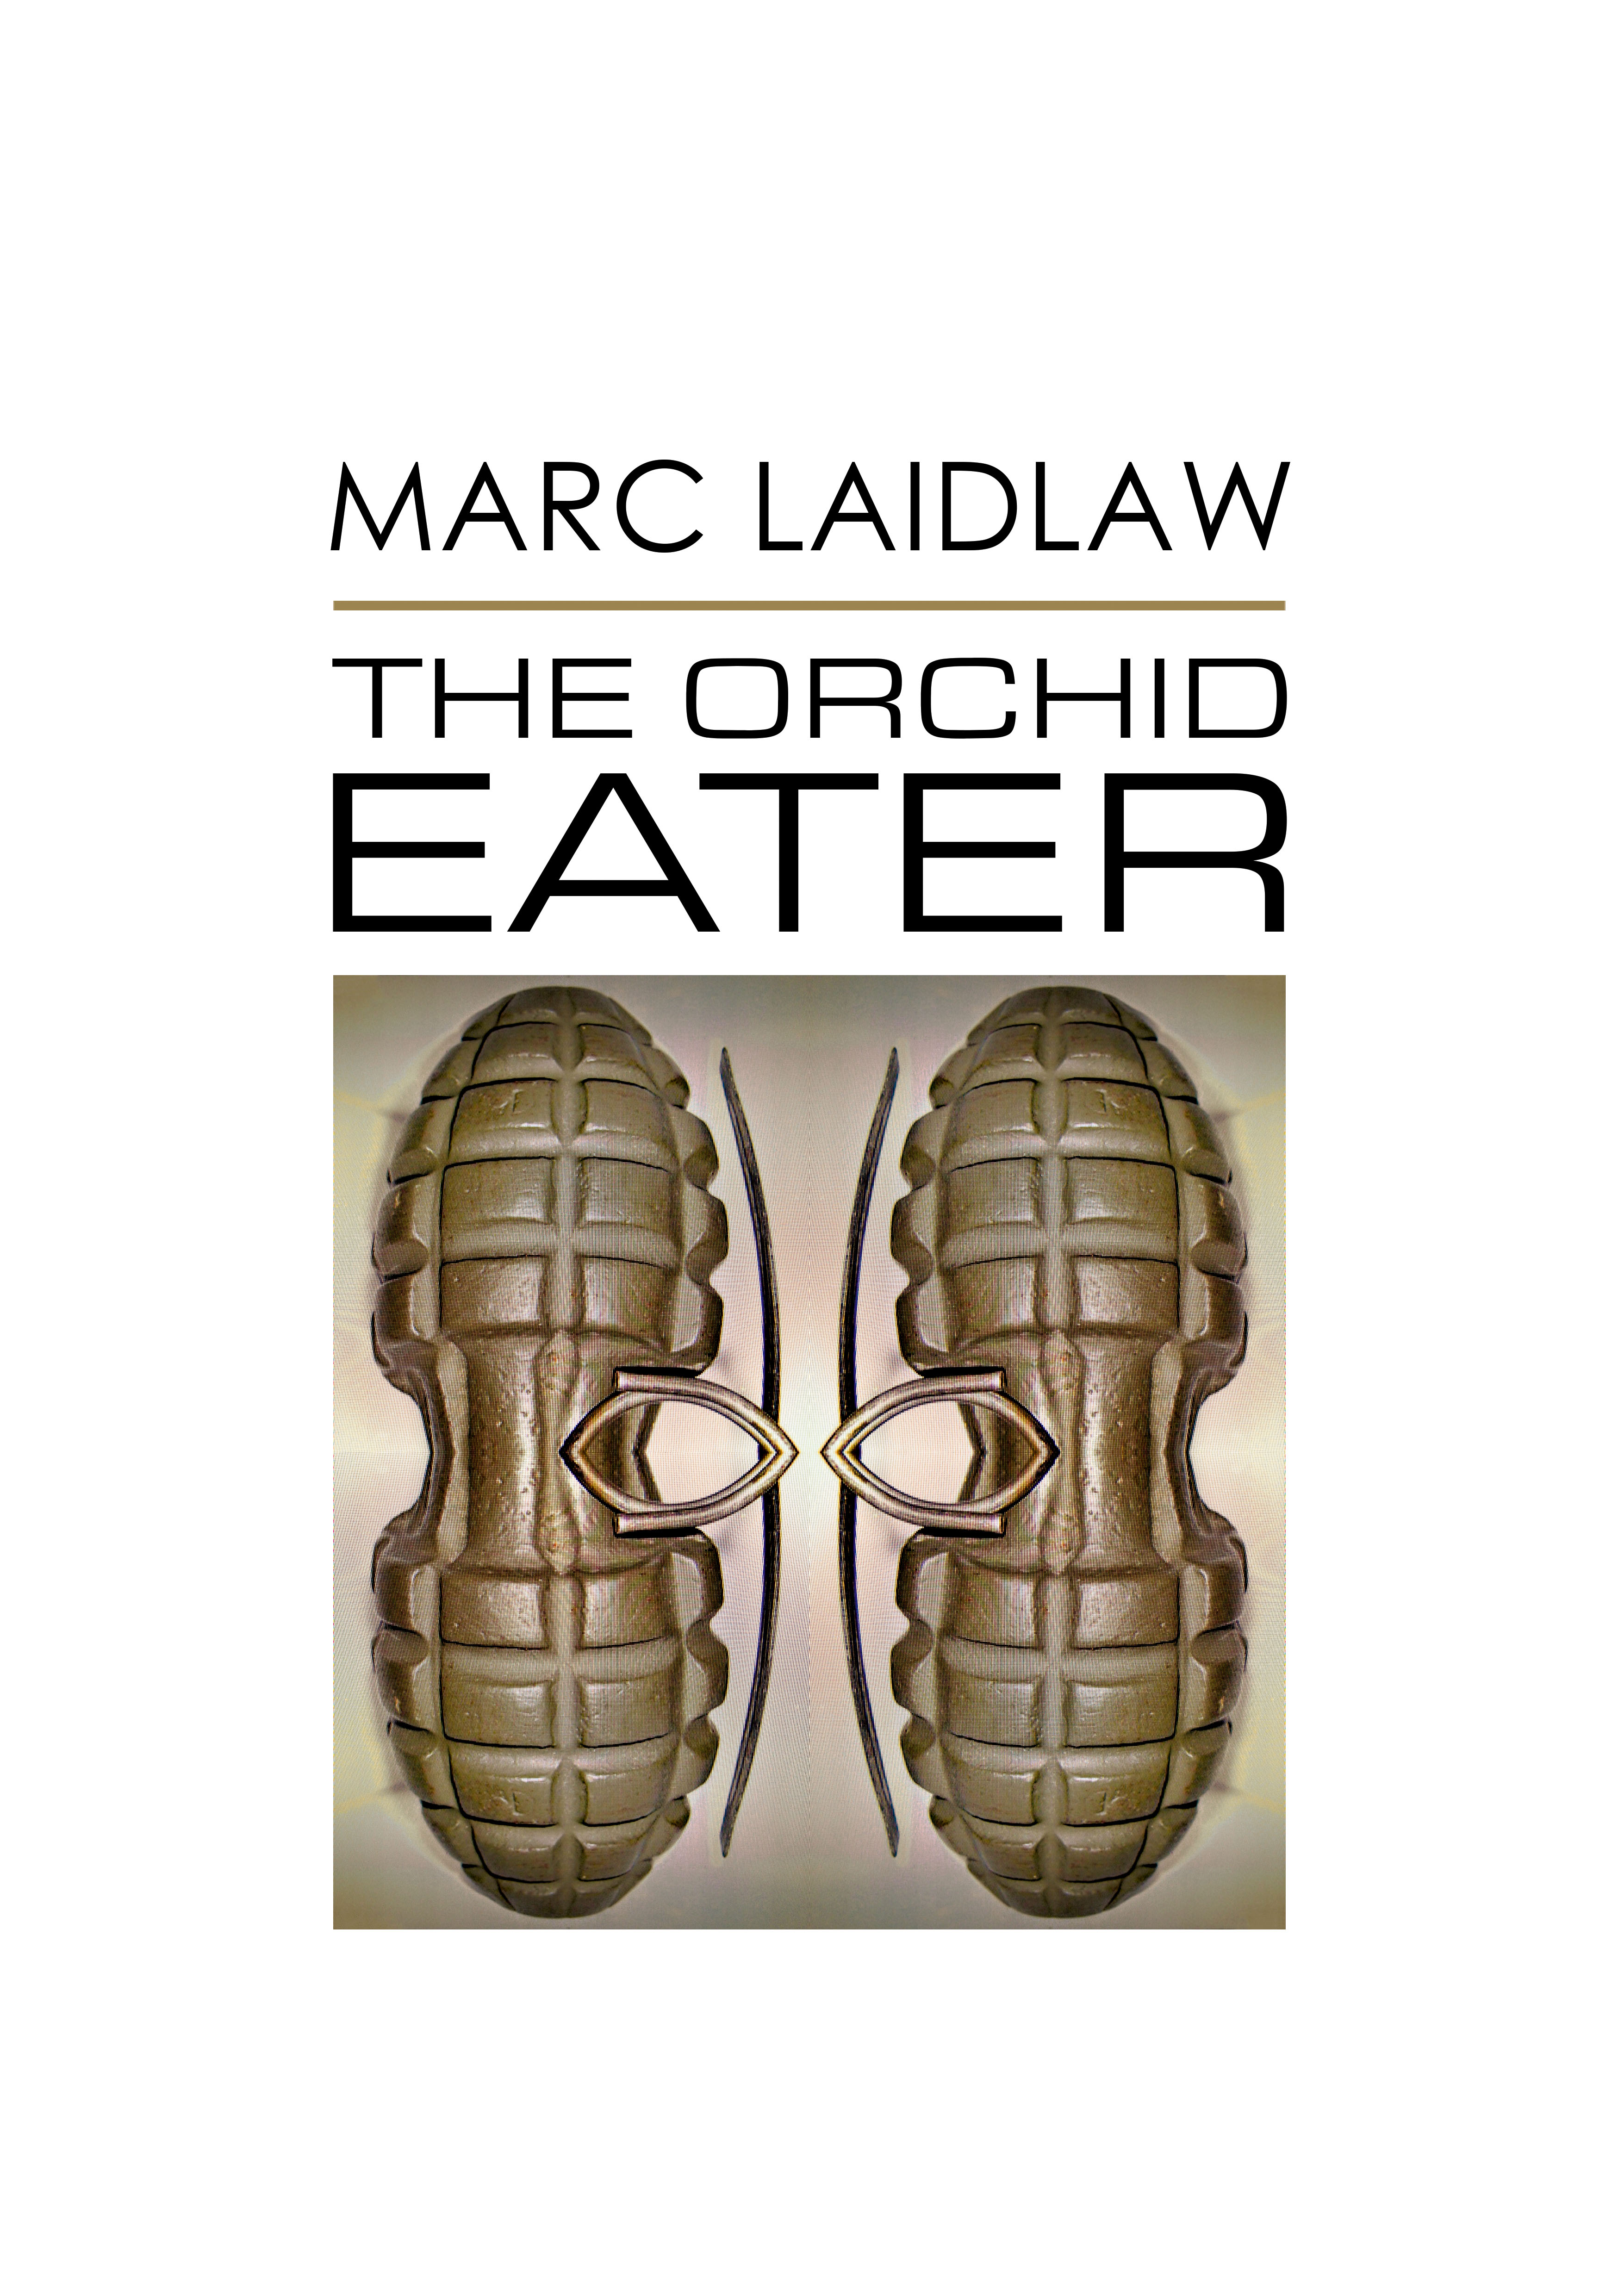 marc_laidlaw_cover_the_orchid_eater_06_29_2016